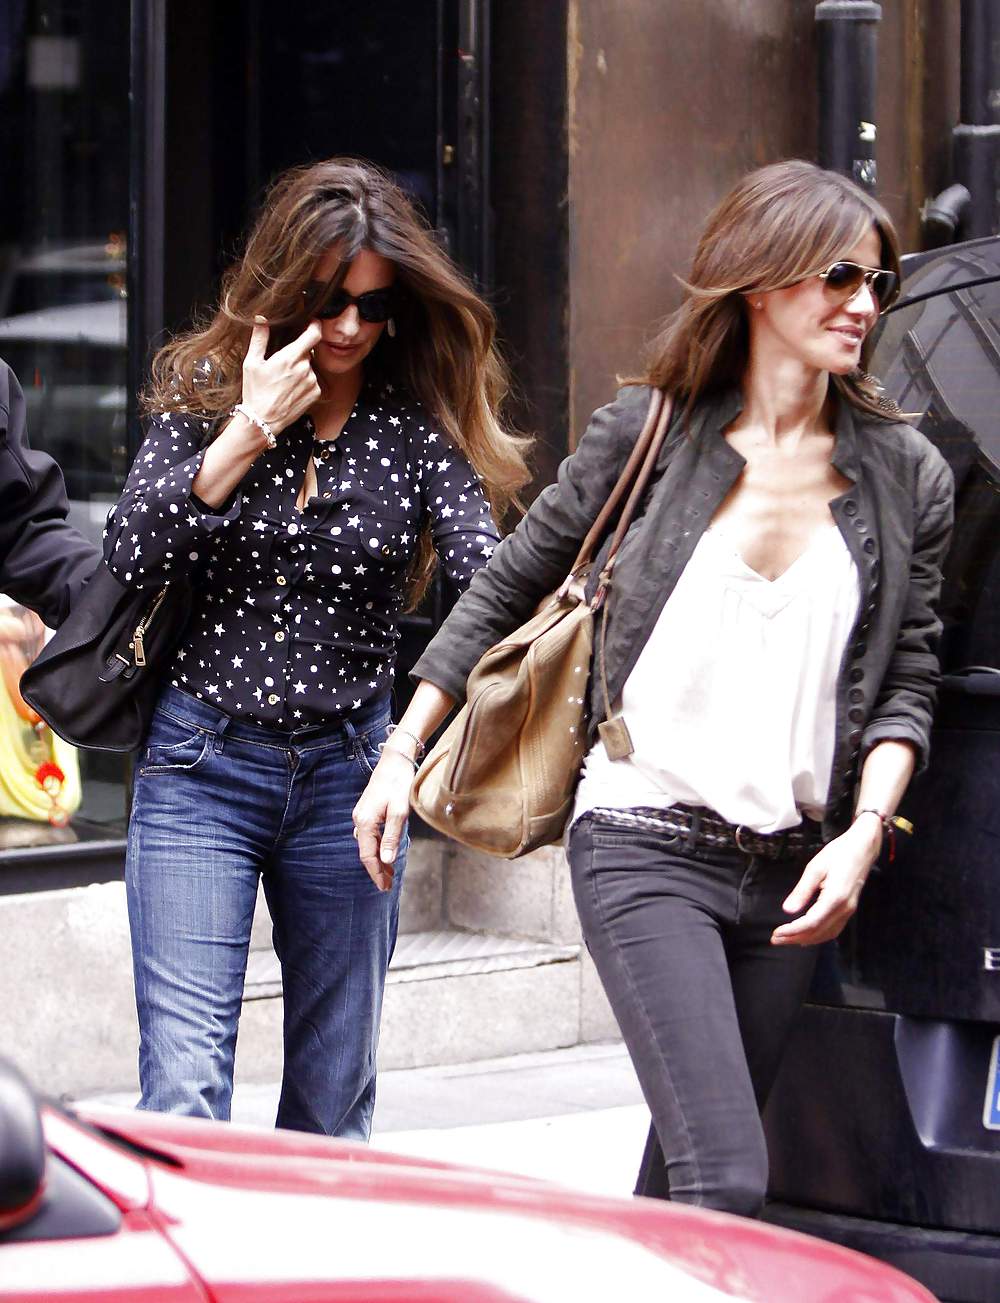 Penelope Cruz shopping with a friend in Madrid #3994470